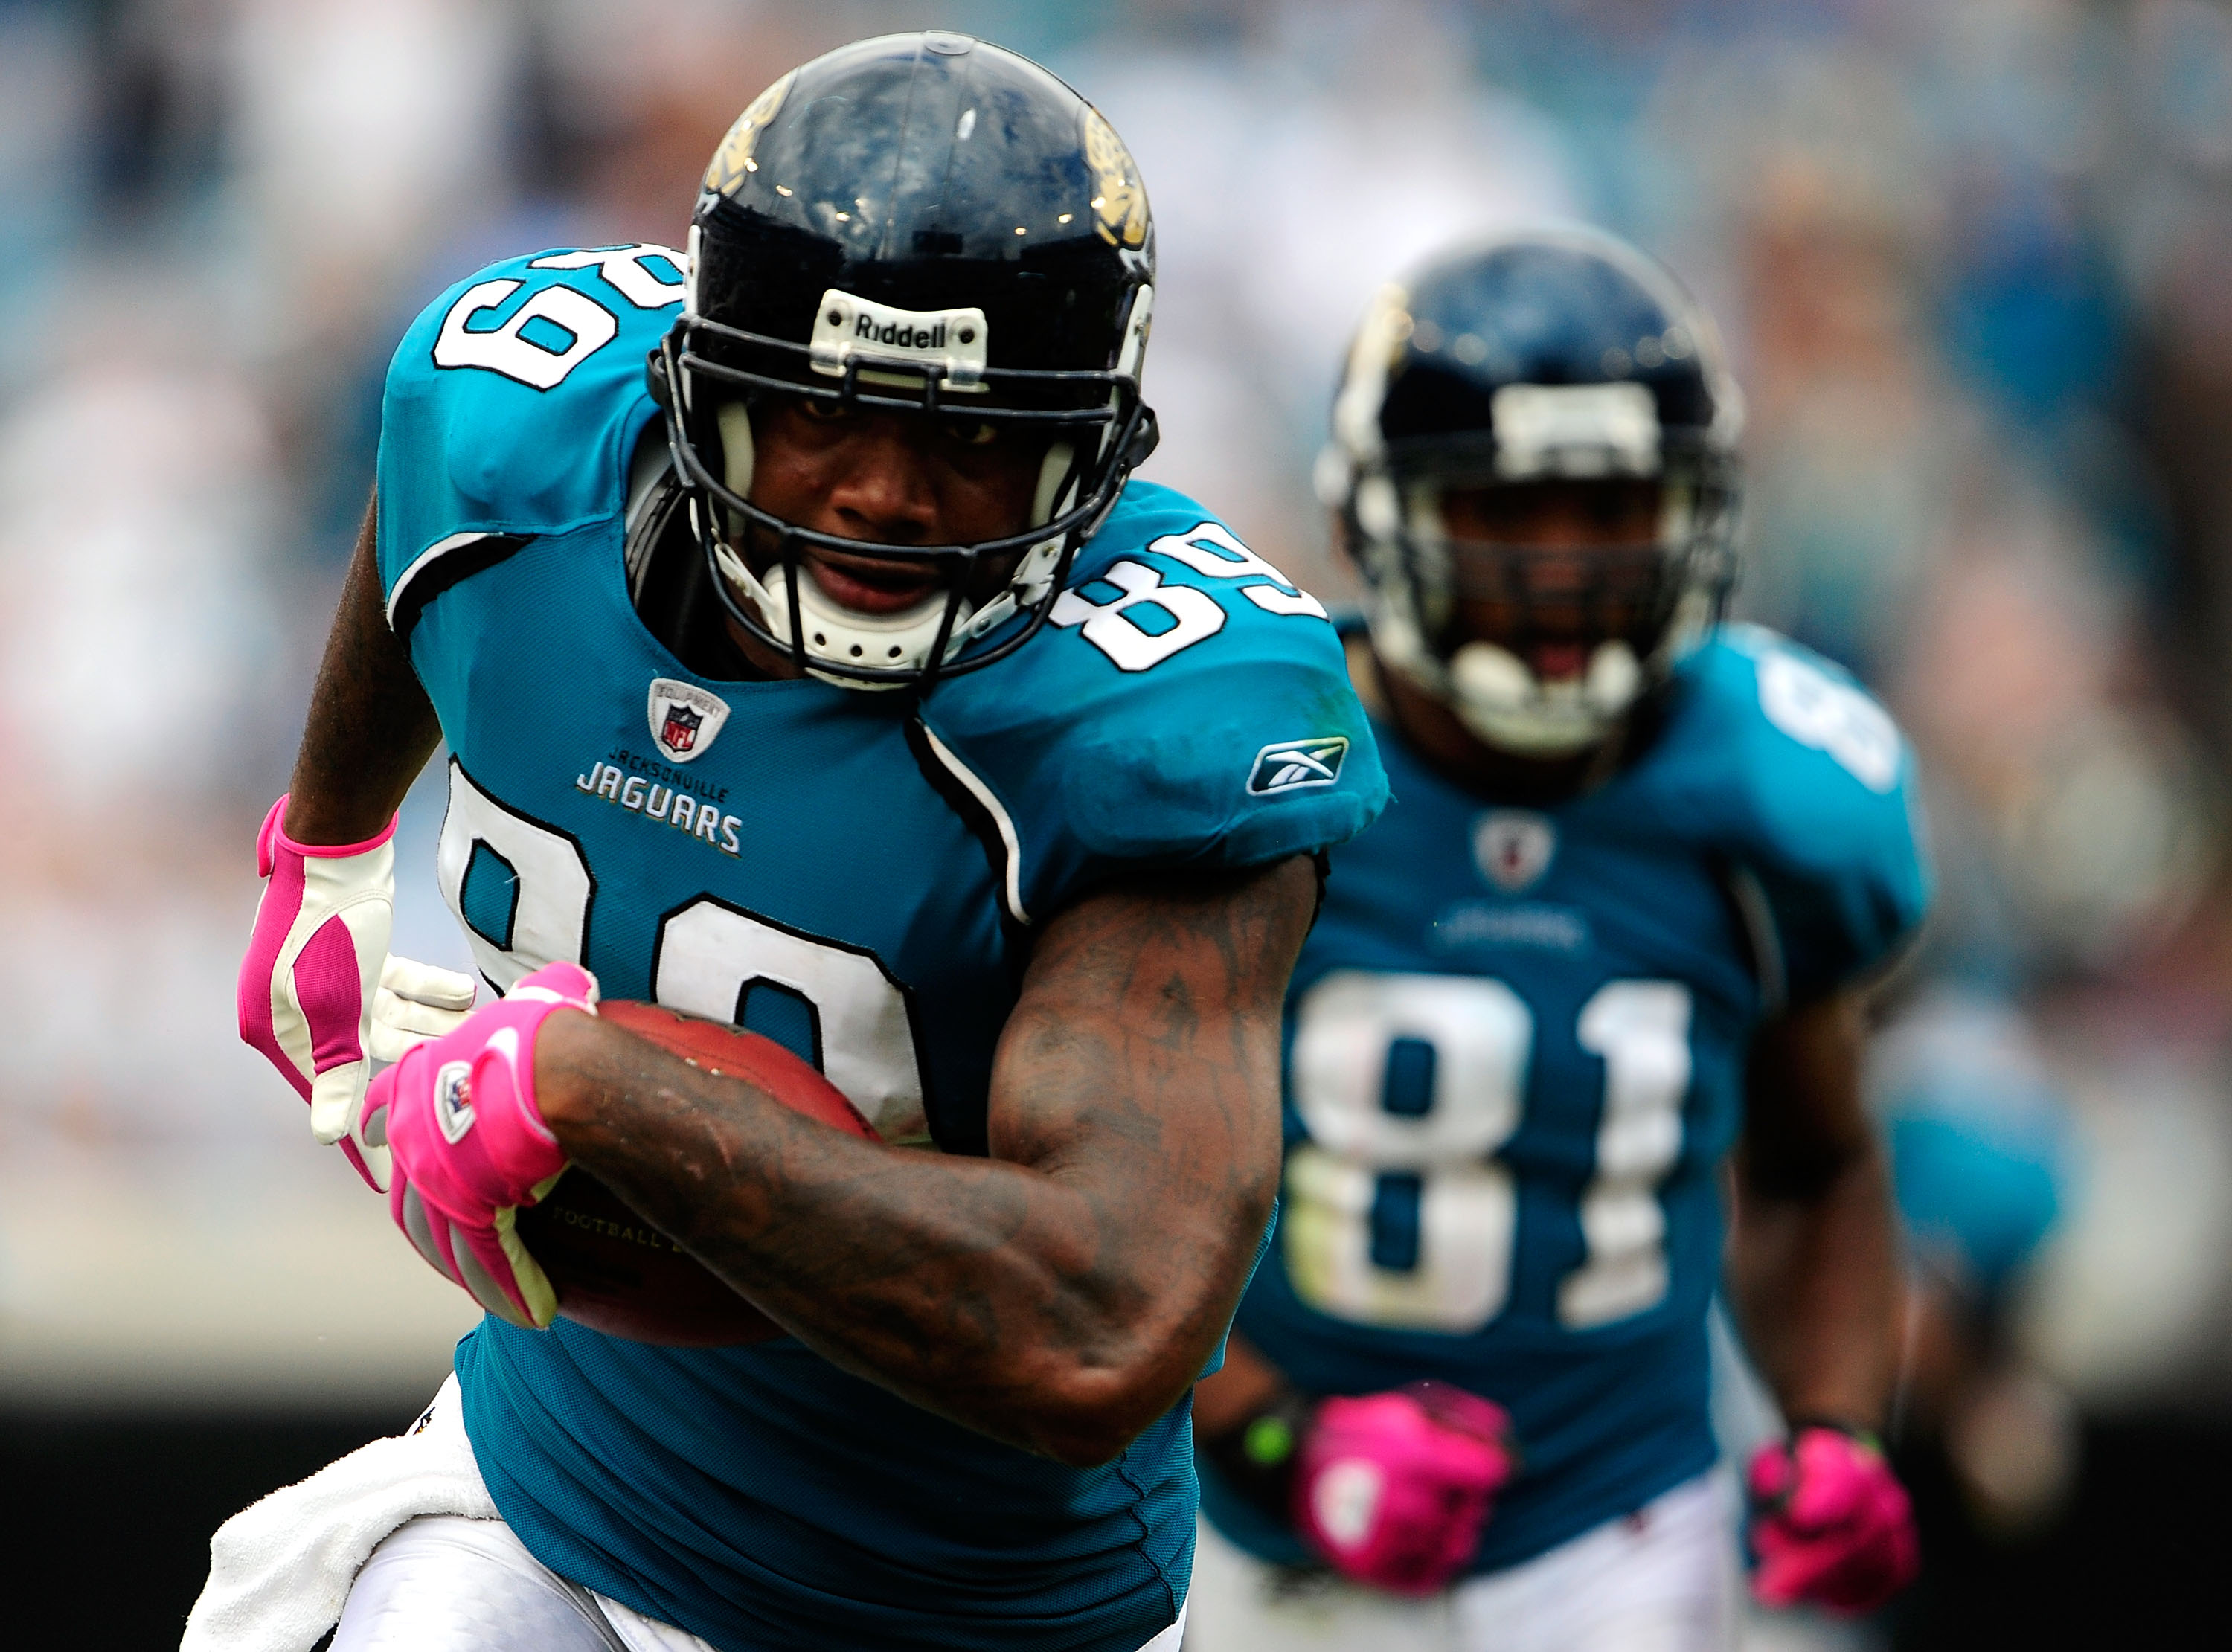 JACKSONVILLE, FL - OCTOBER 04:  Marcedes Lewis #89 of the Jacksonville Jaguars runs for a touchdown during the game against the Tennessee Titans at Jacksonville Municipal Stadium on October 4, 2009 in Jacksonville, Florida.  (Photo by Sam Greenwood/Getty